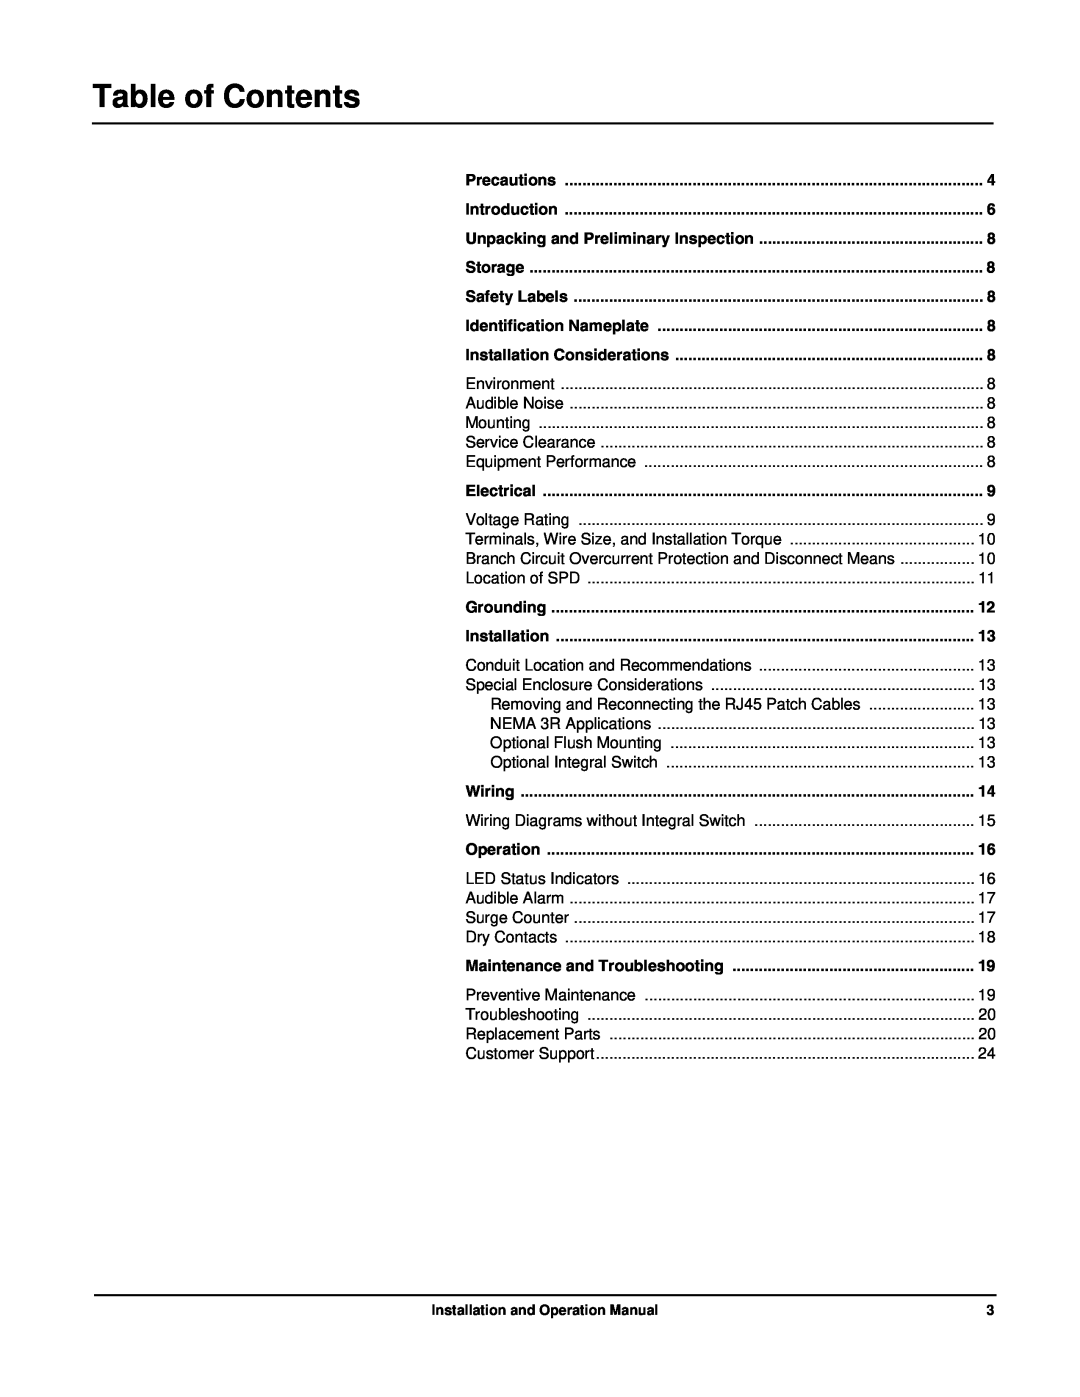 APC PML3XS-B, PMP3XS-B, PMJ3XS-B, PMH3XS-B, PMG3XS-B, PMF3XS-B operation manual Table of Contents 